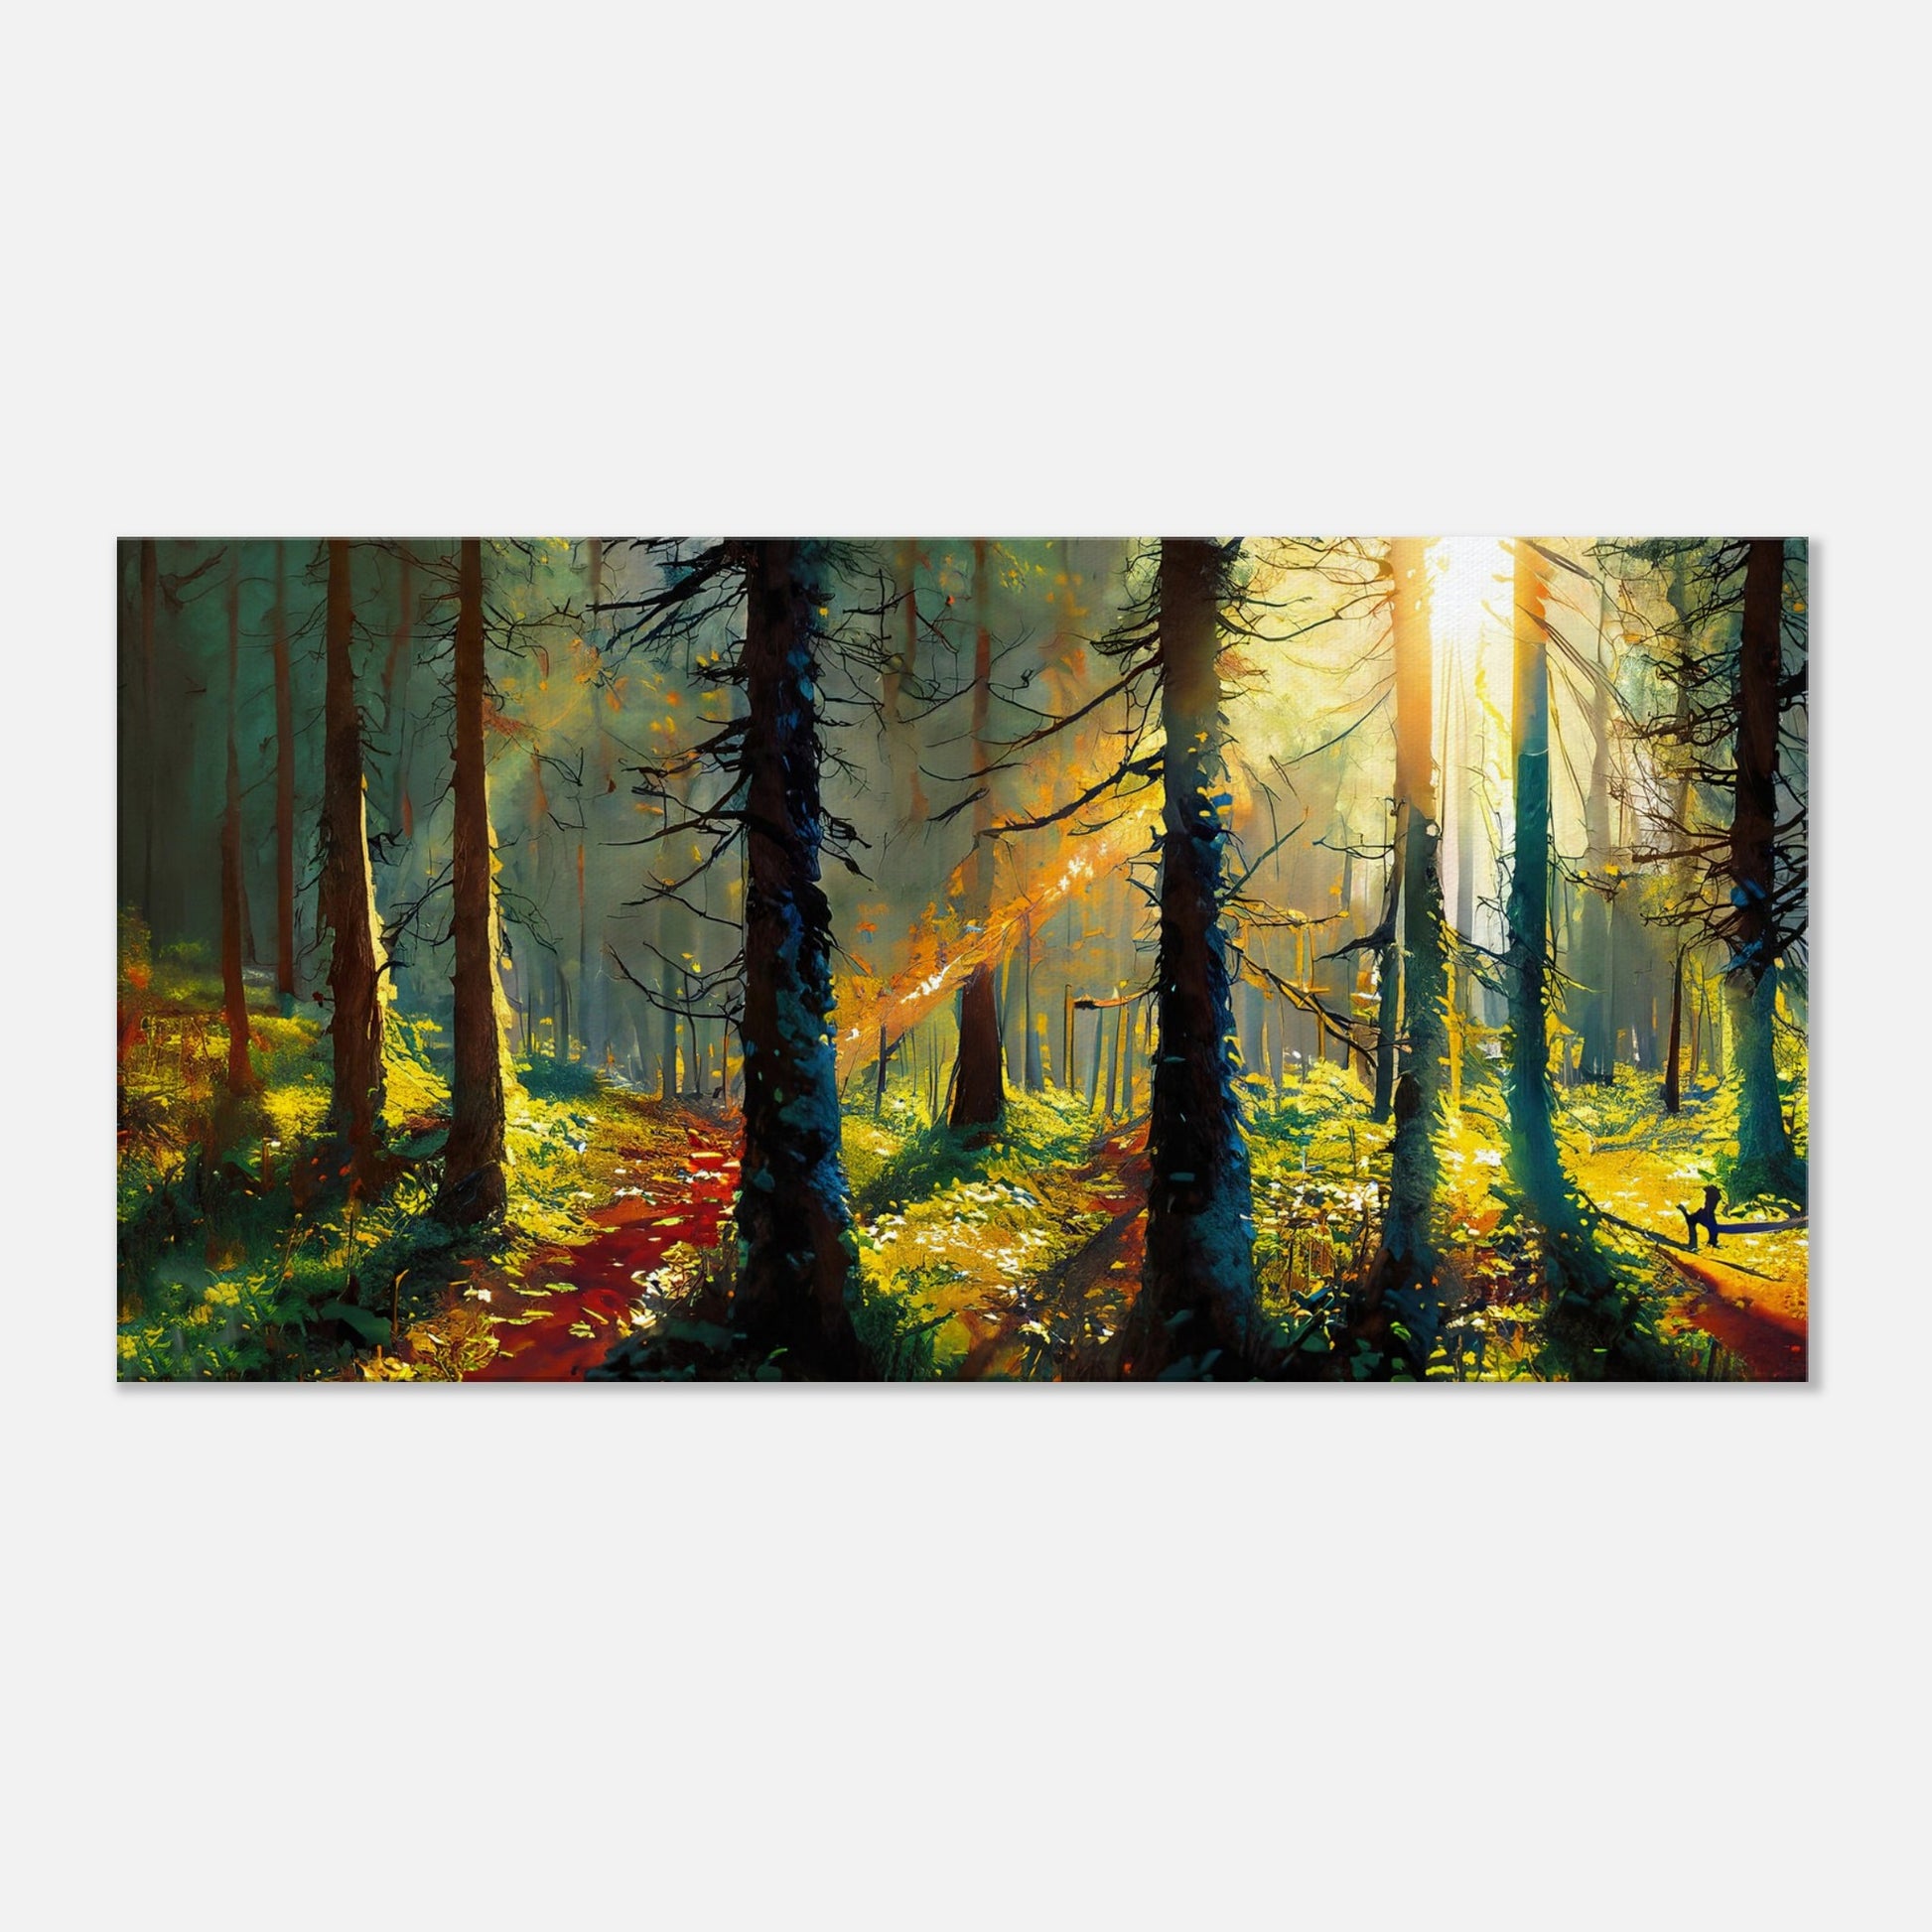 Summer forest #2 on canvas print abstract art By Posterify design 50X100cm - Posterify